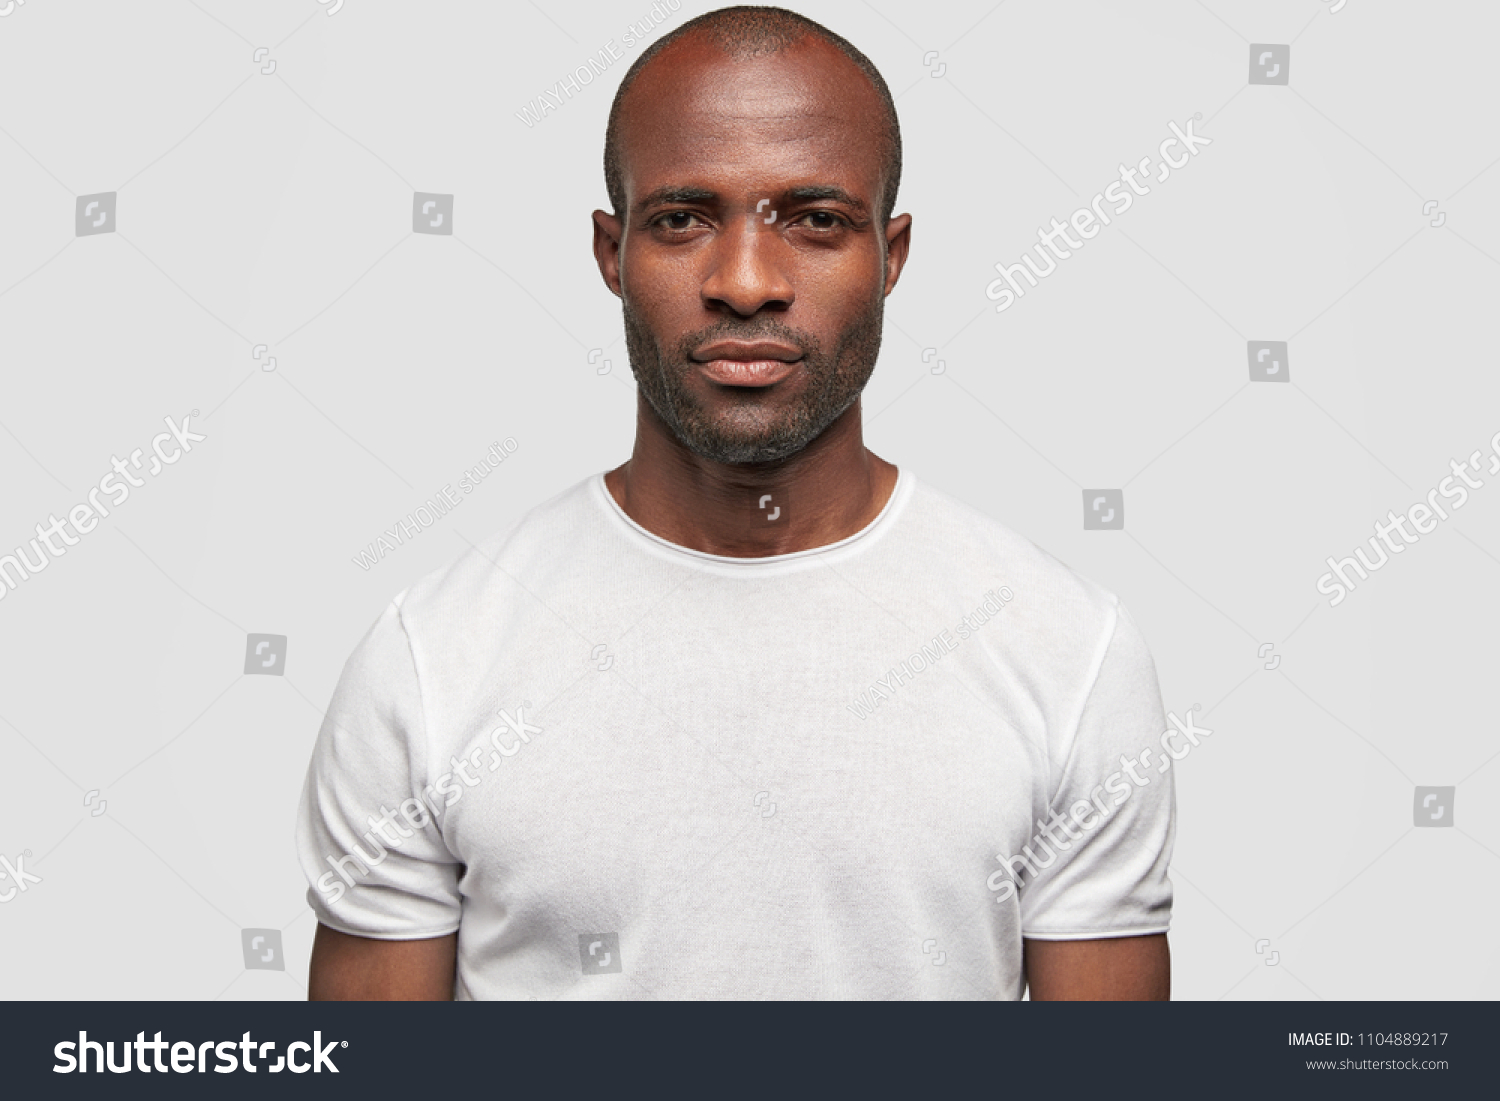 Serious Dark Skinned Young Male Looks Foto Stock 1104889217 Shutterstock